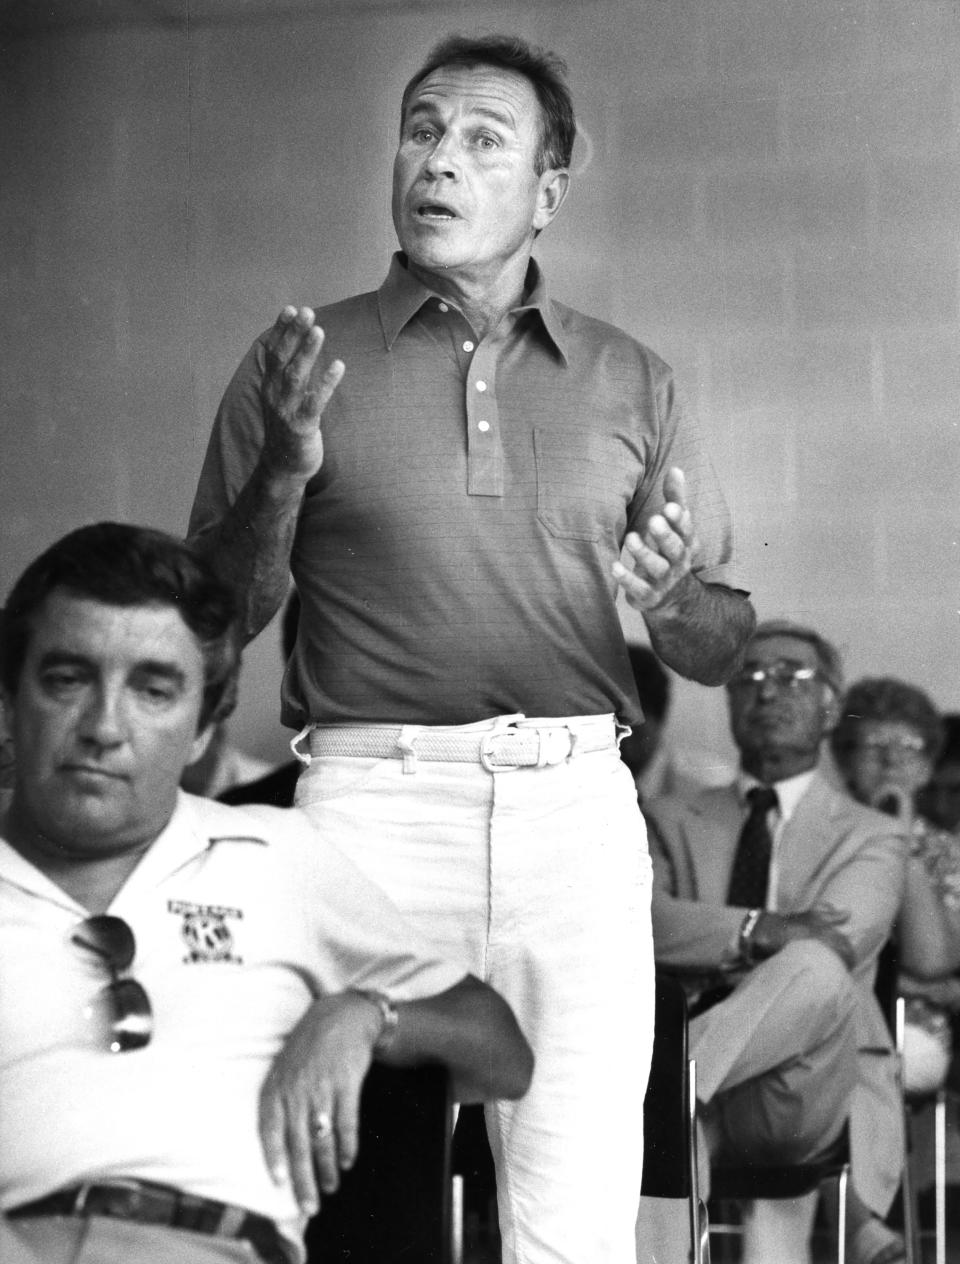 Harry Welch during a 1985 Green Township meeting.